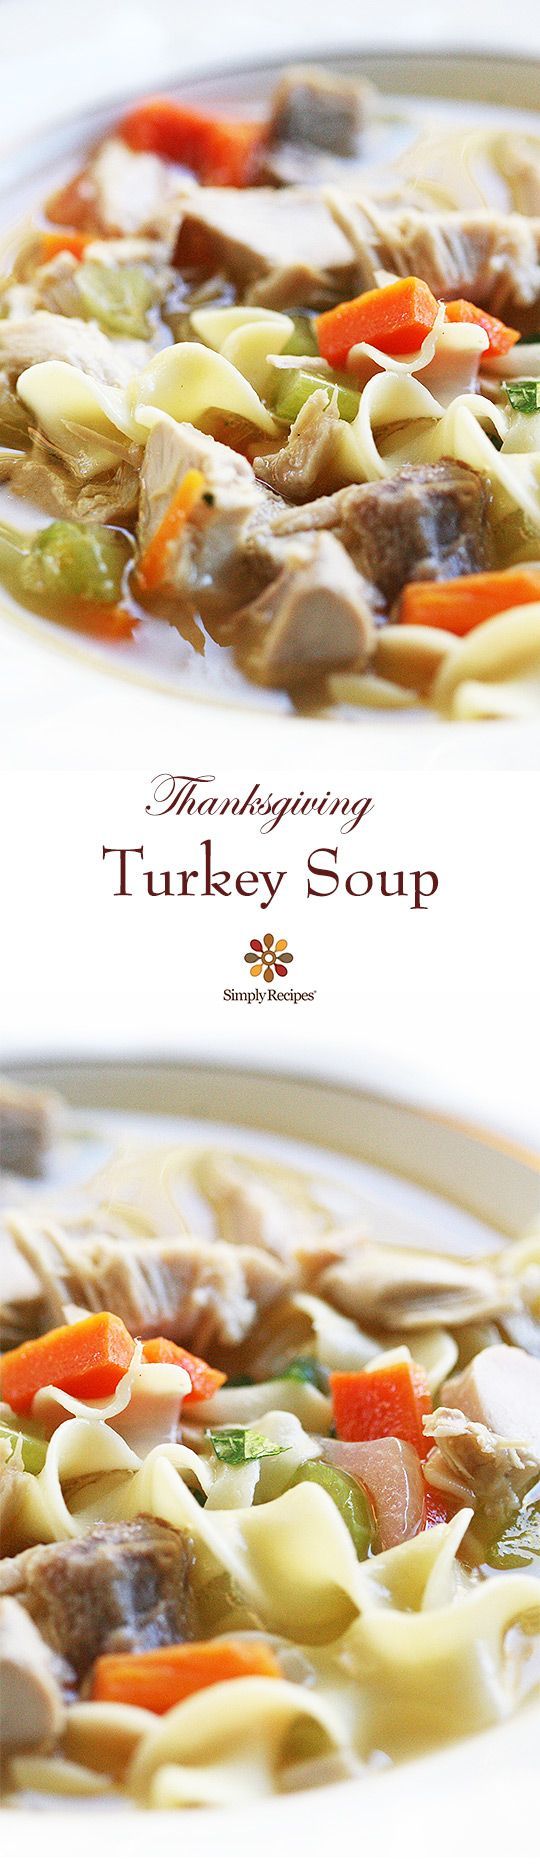 Classic turkey soup recipe! Every Thanksgiving my mother takes what’s left of the turkey carcass and makes a delicious turkey soup